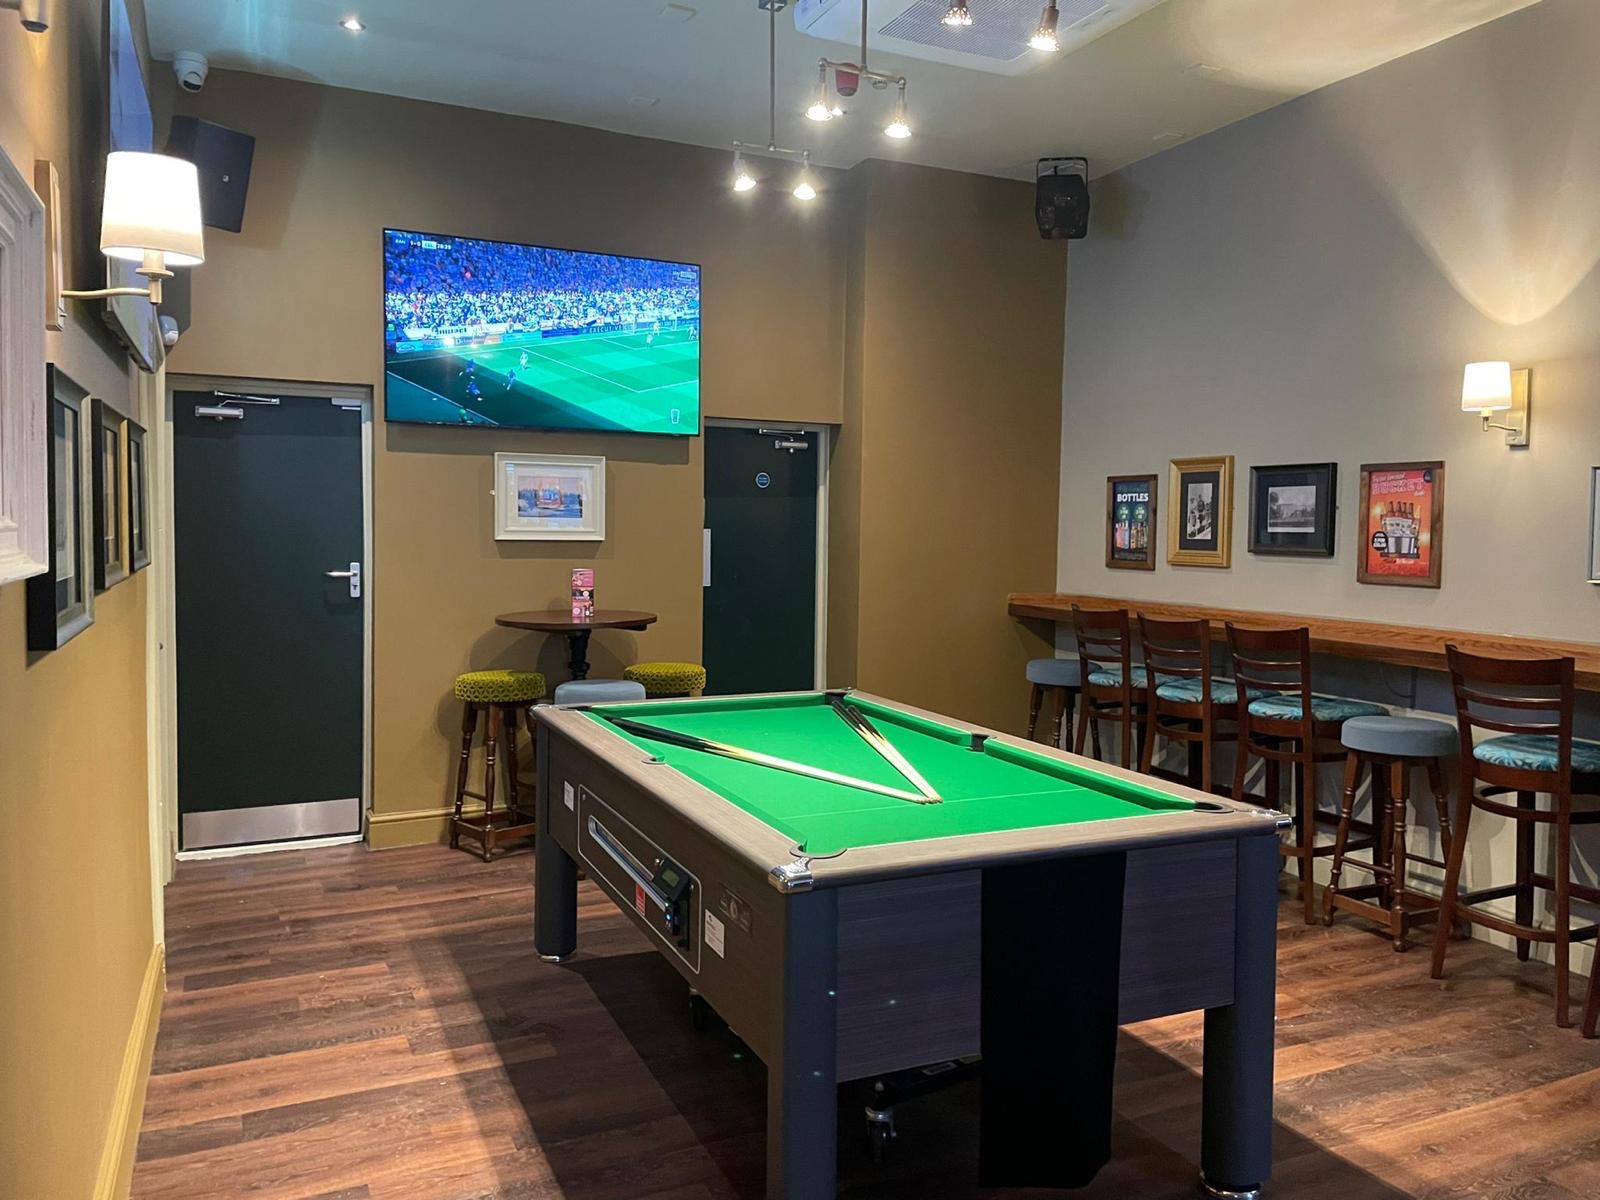 The sports bar at the Lord Fitzclanence pub 